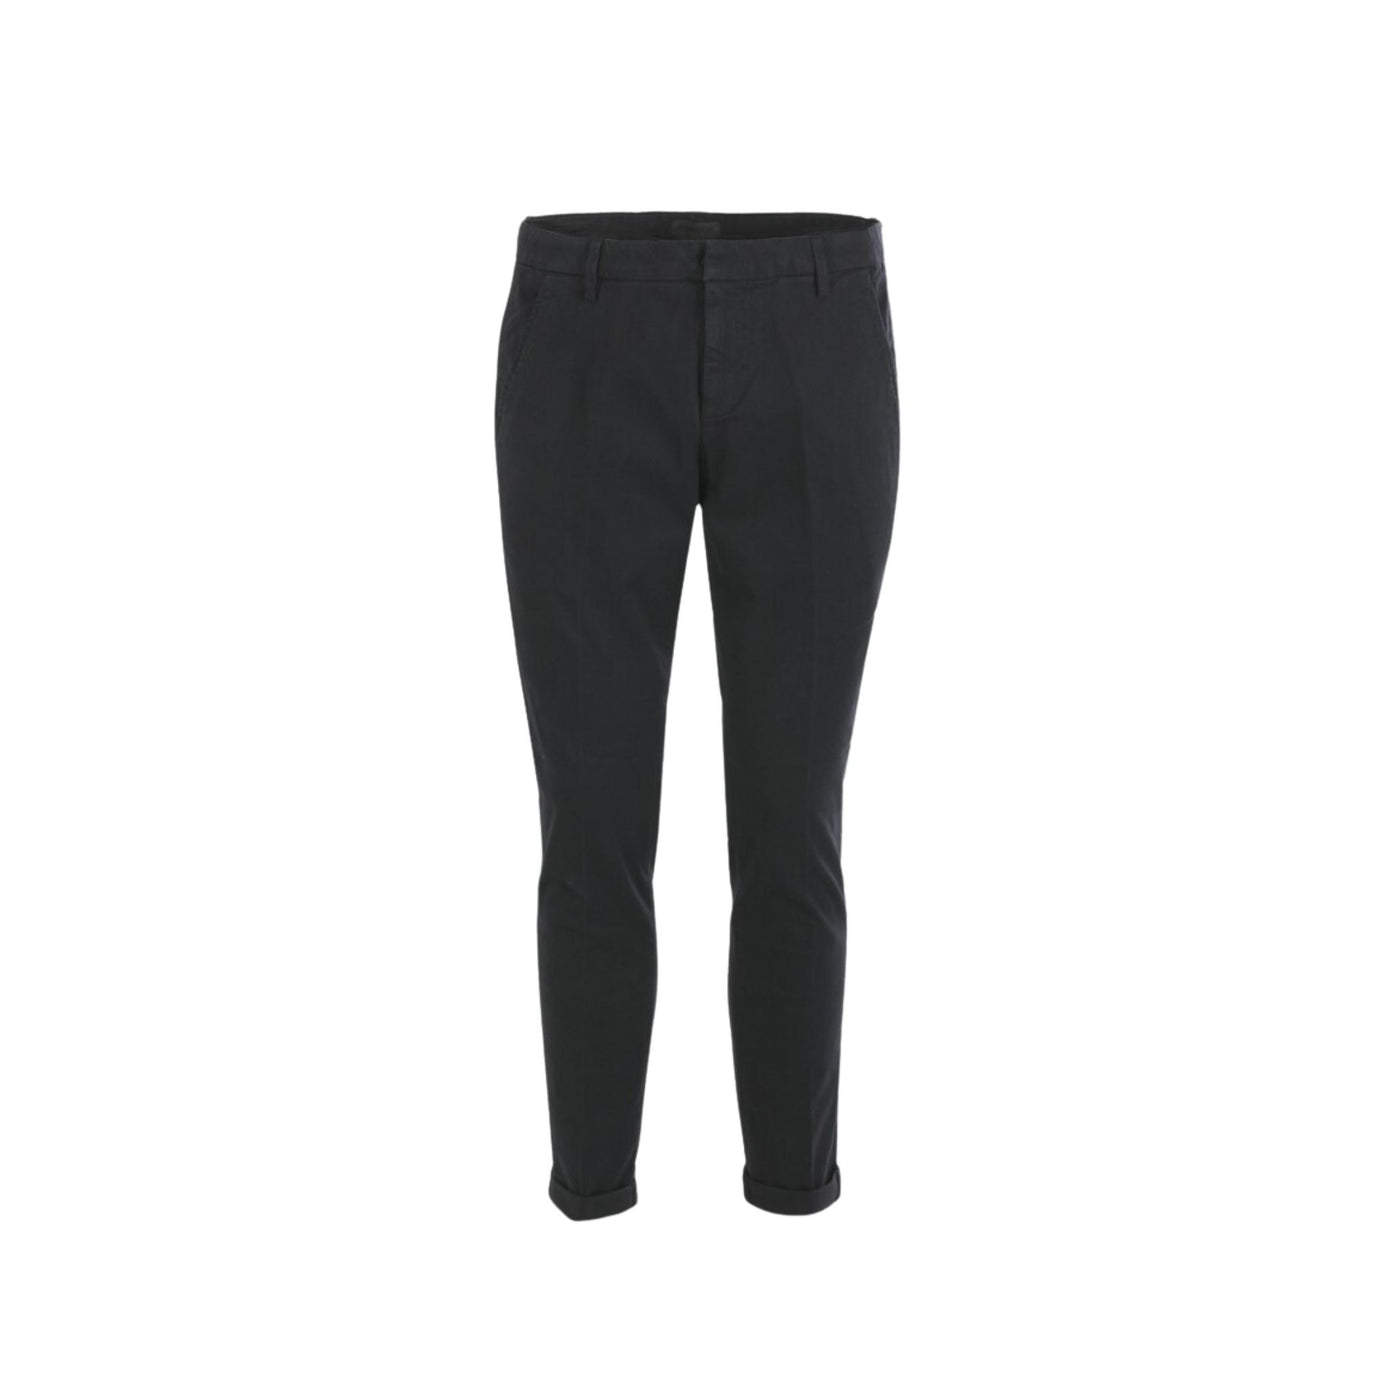 Low-waisted men's trousers